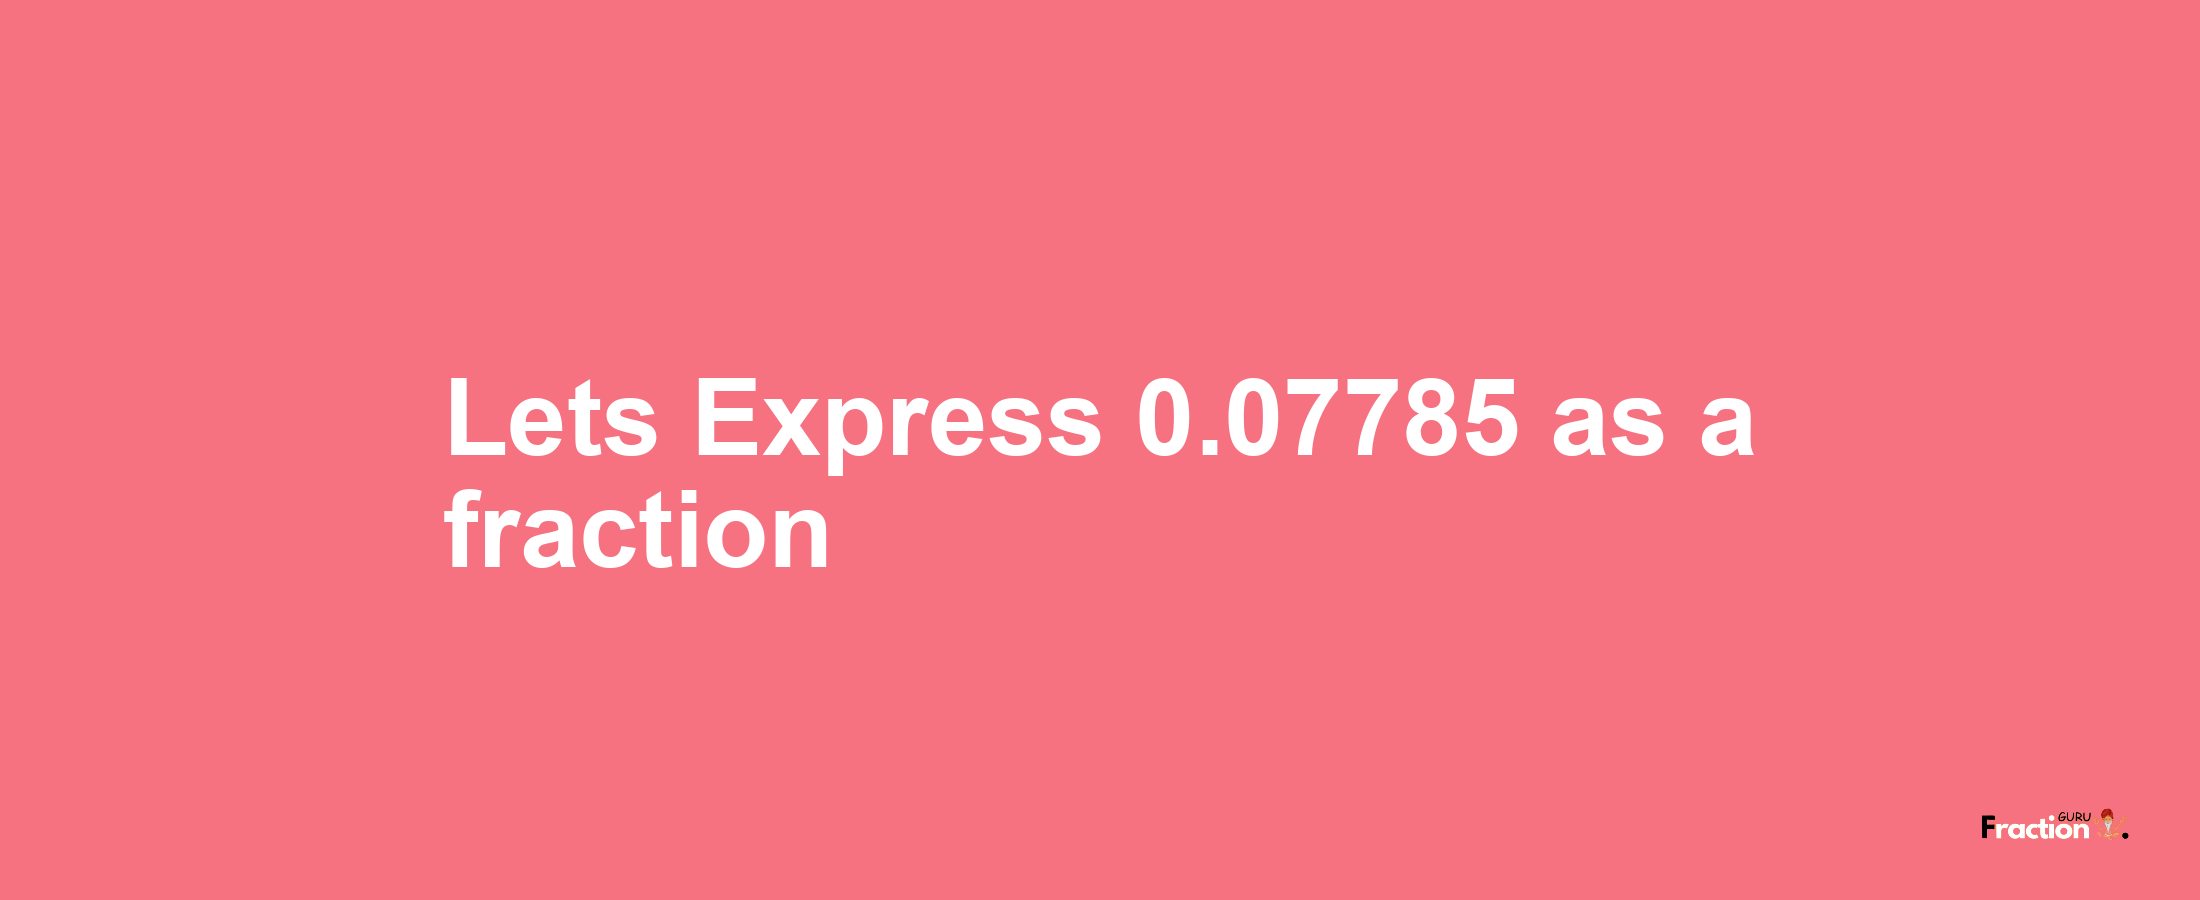 Lets Express 0.07785 as afraction